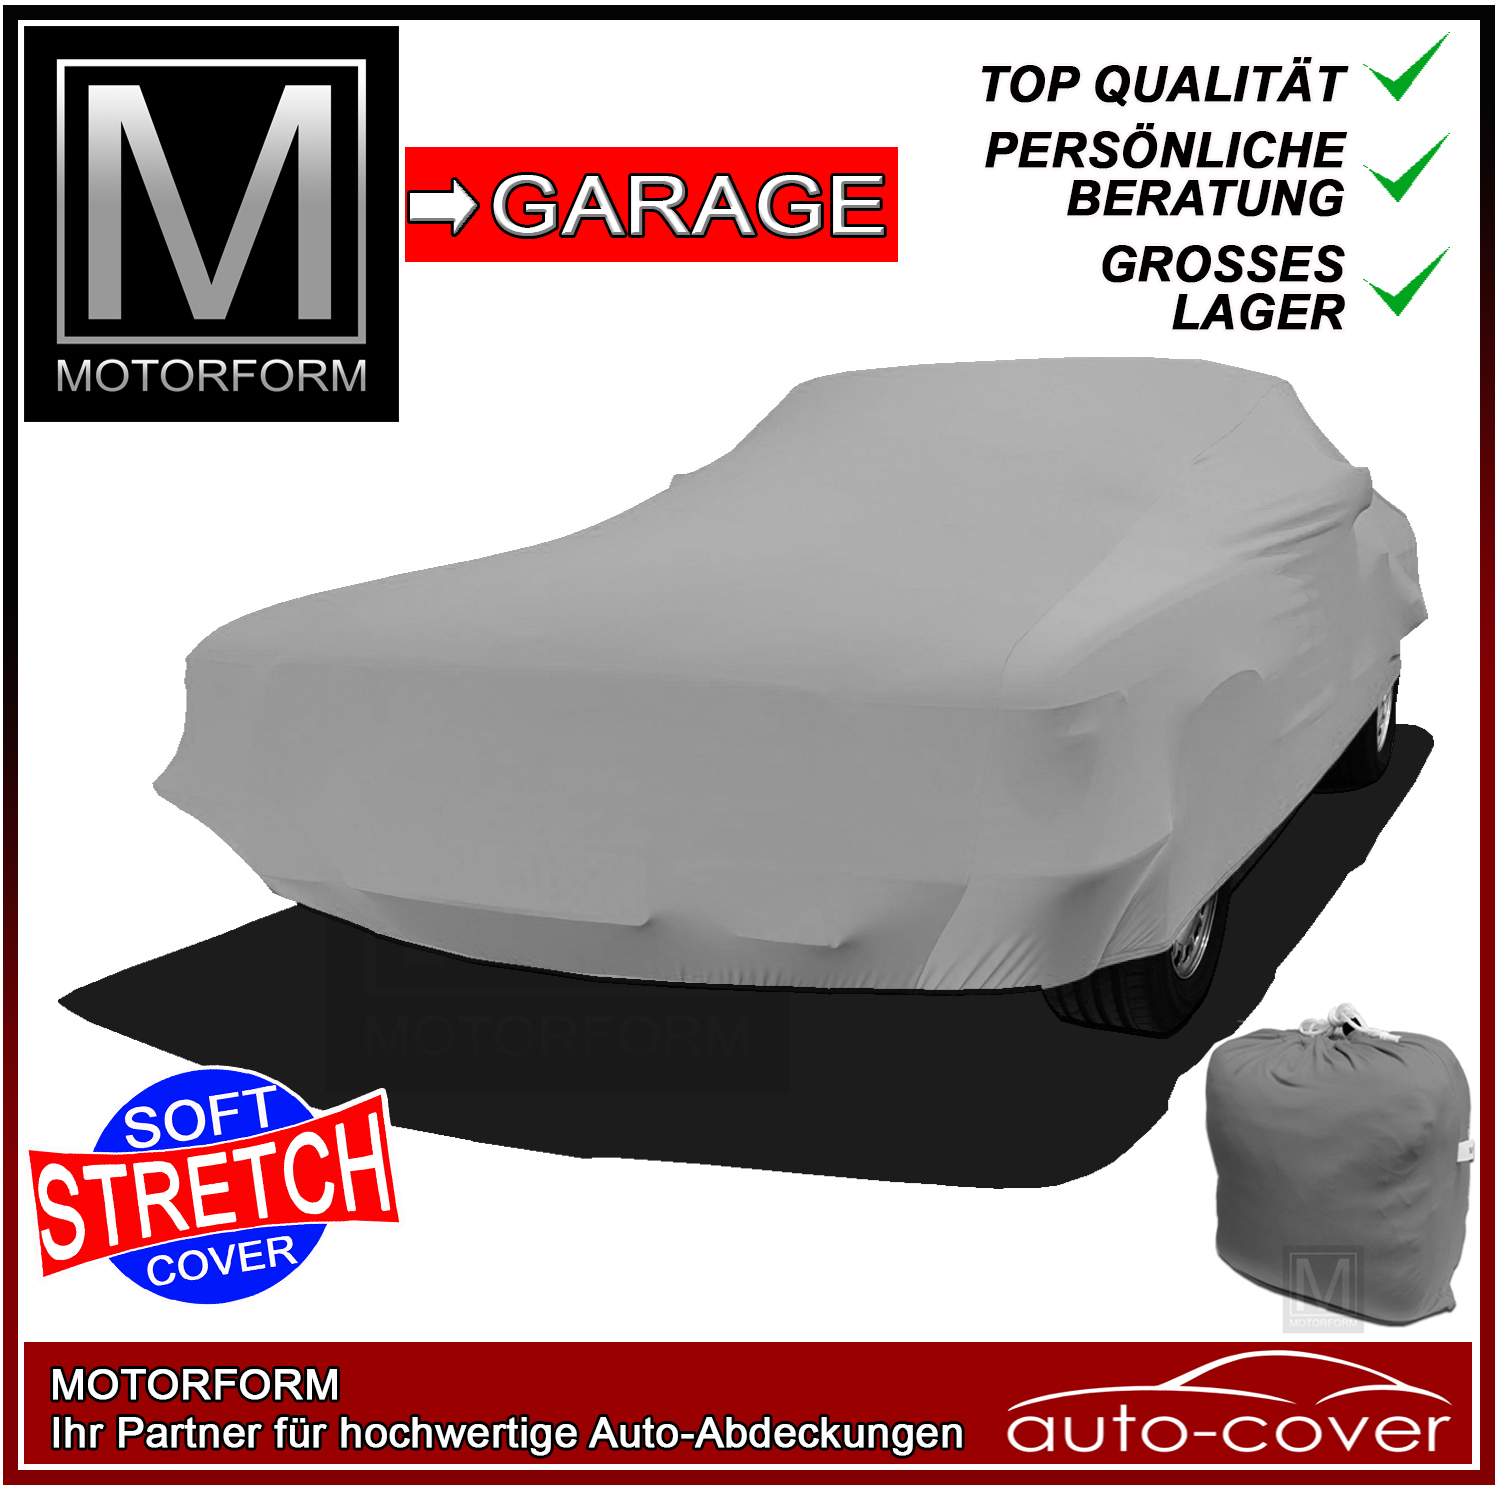 Grey Super Stretchy Cover for Ford Zephir IV